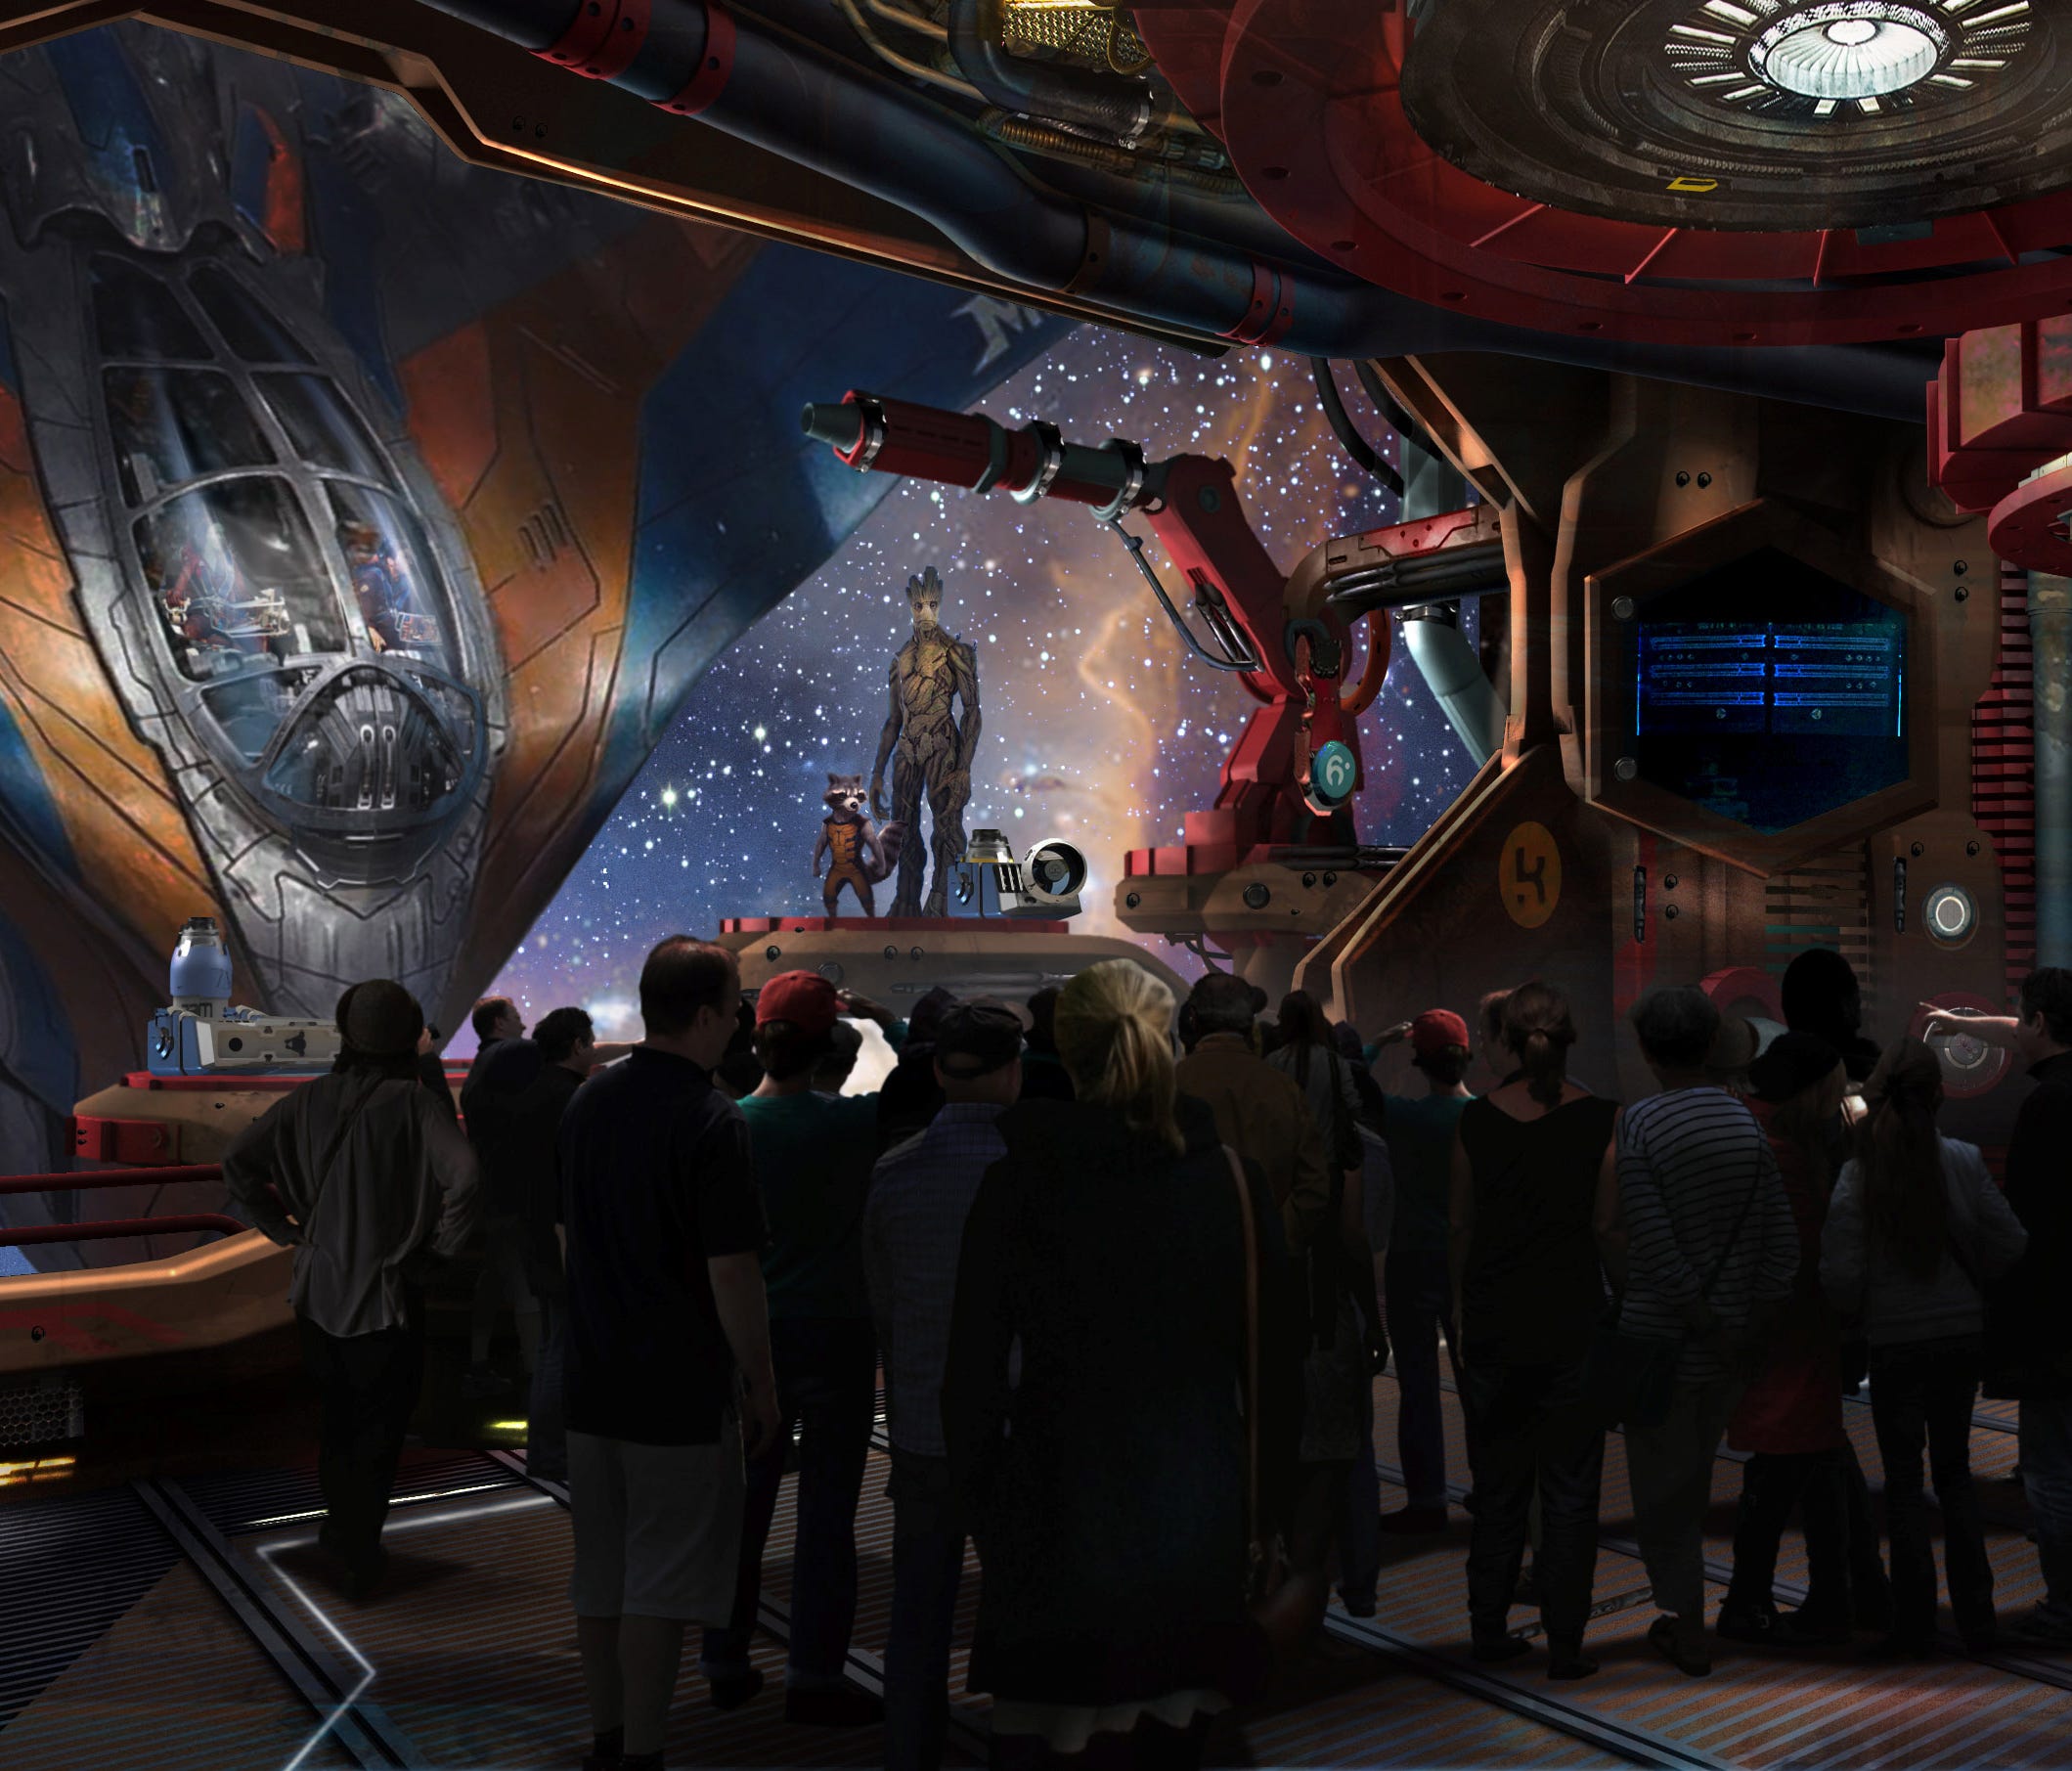 AT D23 EXPO 2017, DISNEY PARKS CHAIRMAN BOB CHAPEK ANNOUNCES E-TICKET GUARDIANS OF THE GALAXY ATTRACTION COMING TO EPCOT -- Looking ahead to the 50th Anniversary of Walt Disney World, Disney Parks Chairman Bob Chapek announced exciting plans across E